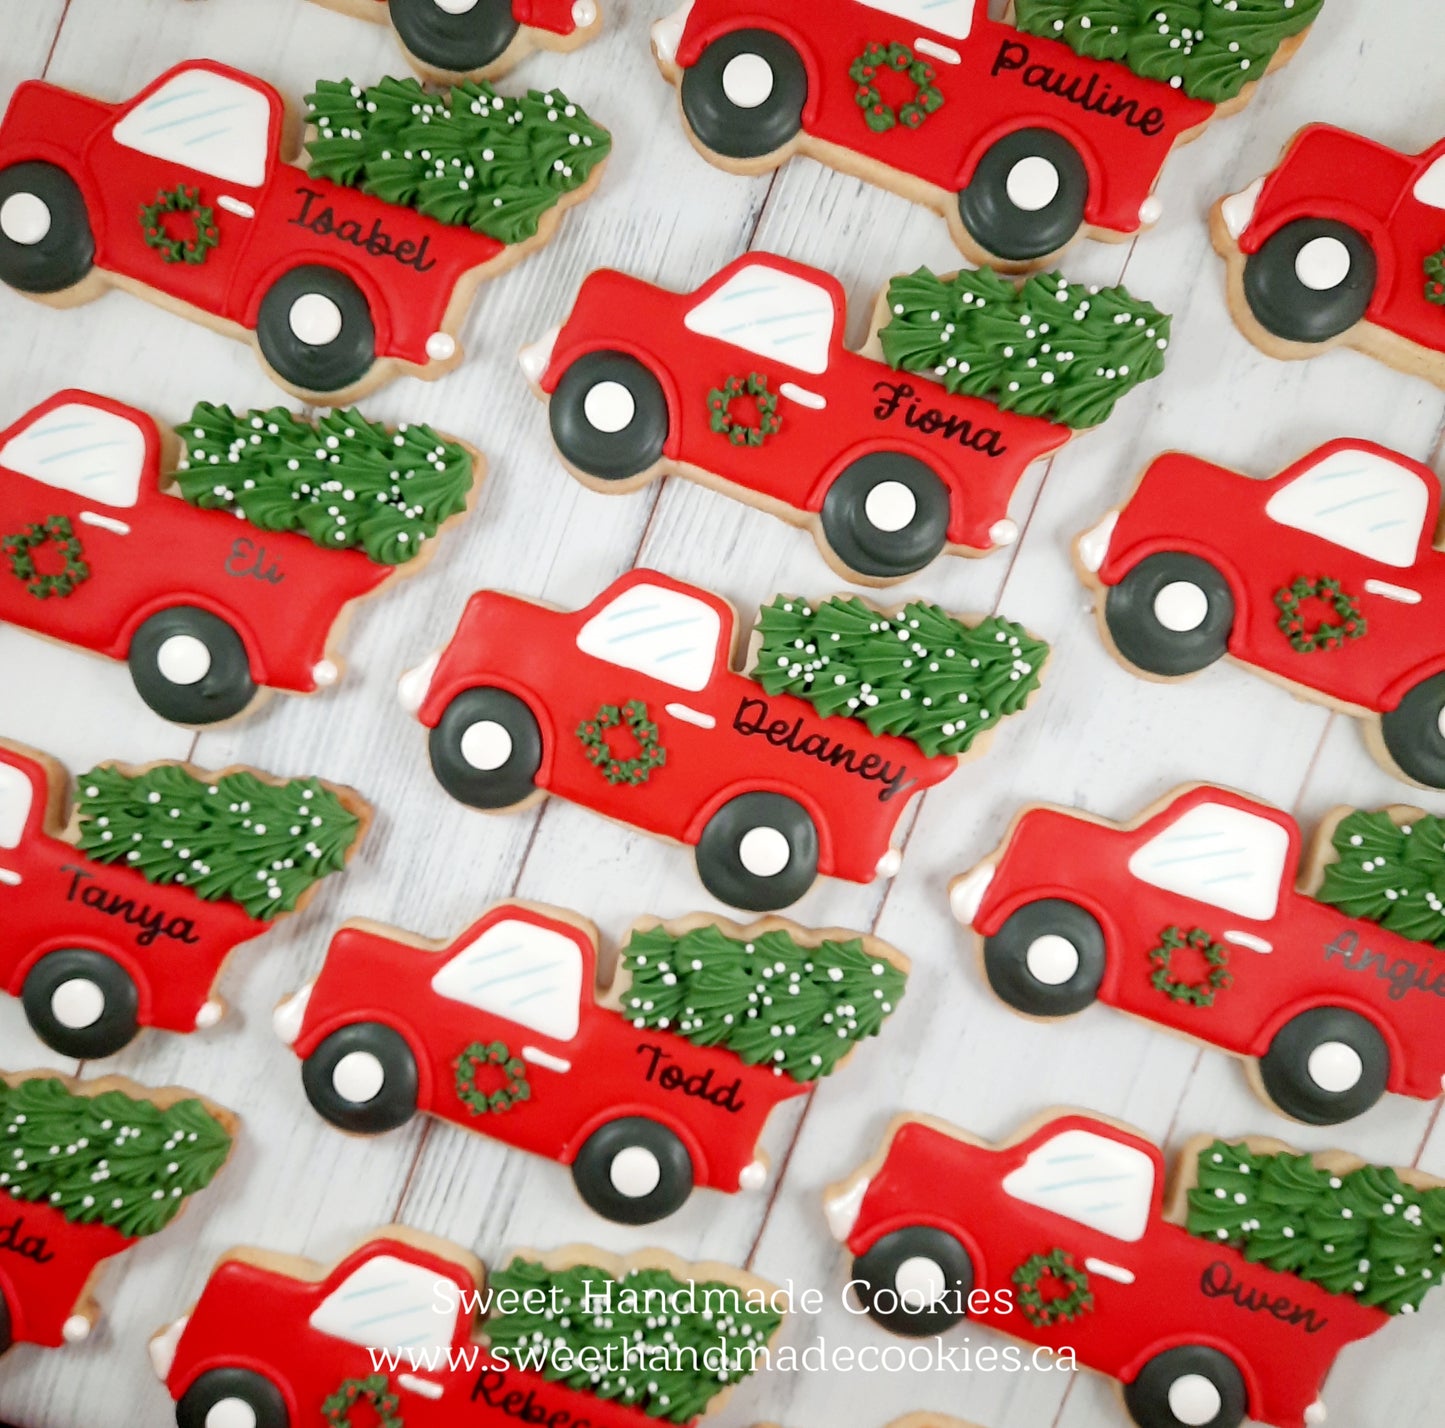 Classic - Red Pickup Truck with Christmas Tree Cookie (sold individually)